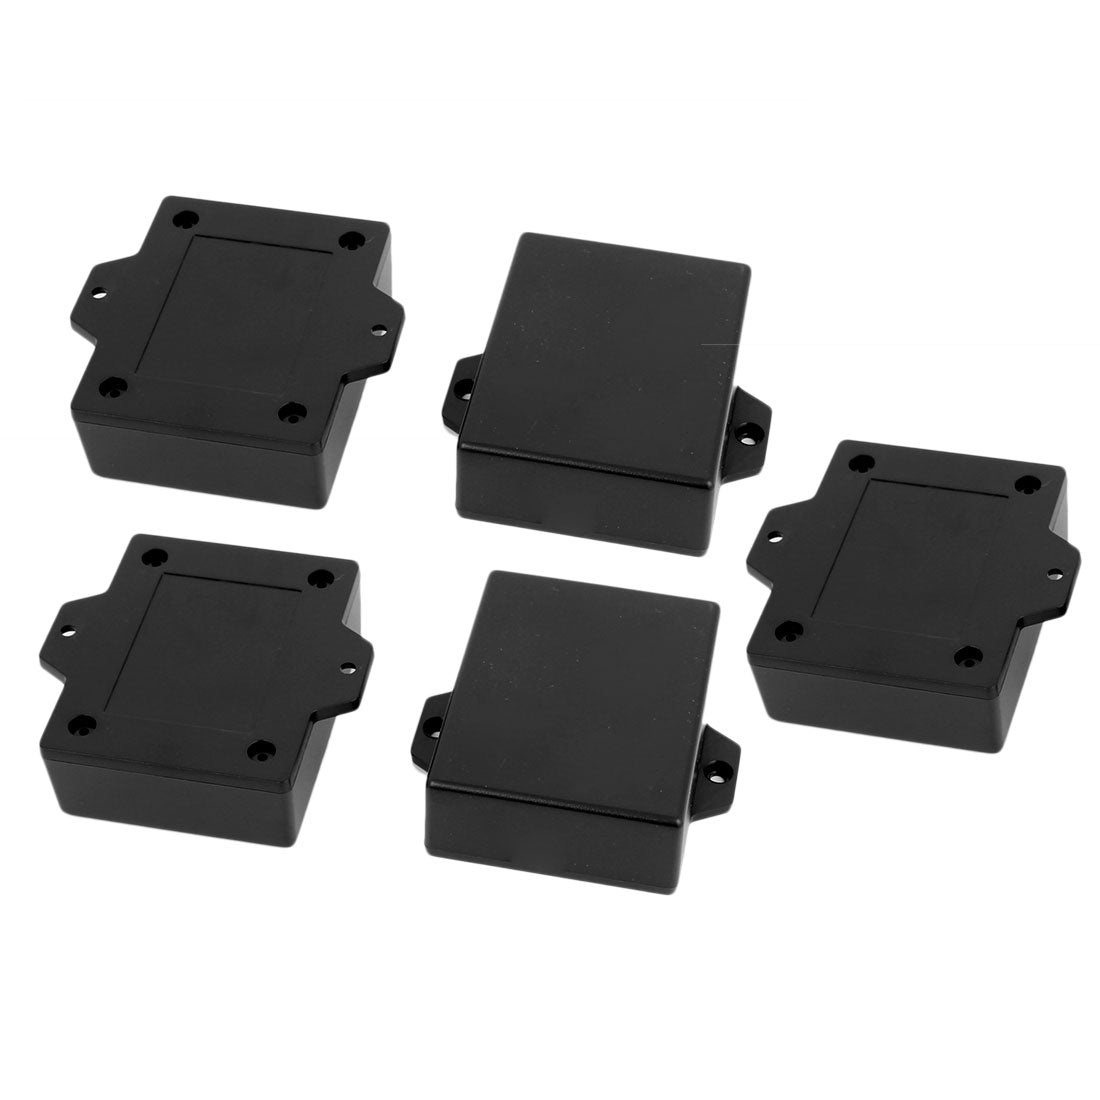 uxcell Uxcell 63mmx50mmx22mm Plastic Enclosure Electric Project Case Junction Box Black 5pcs